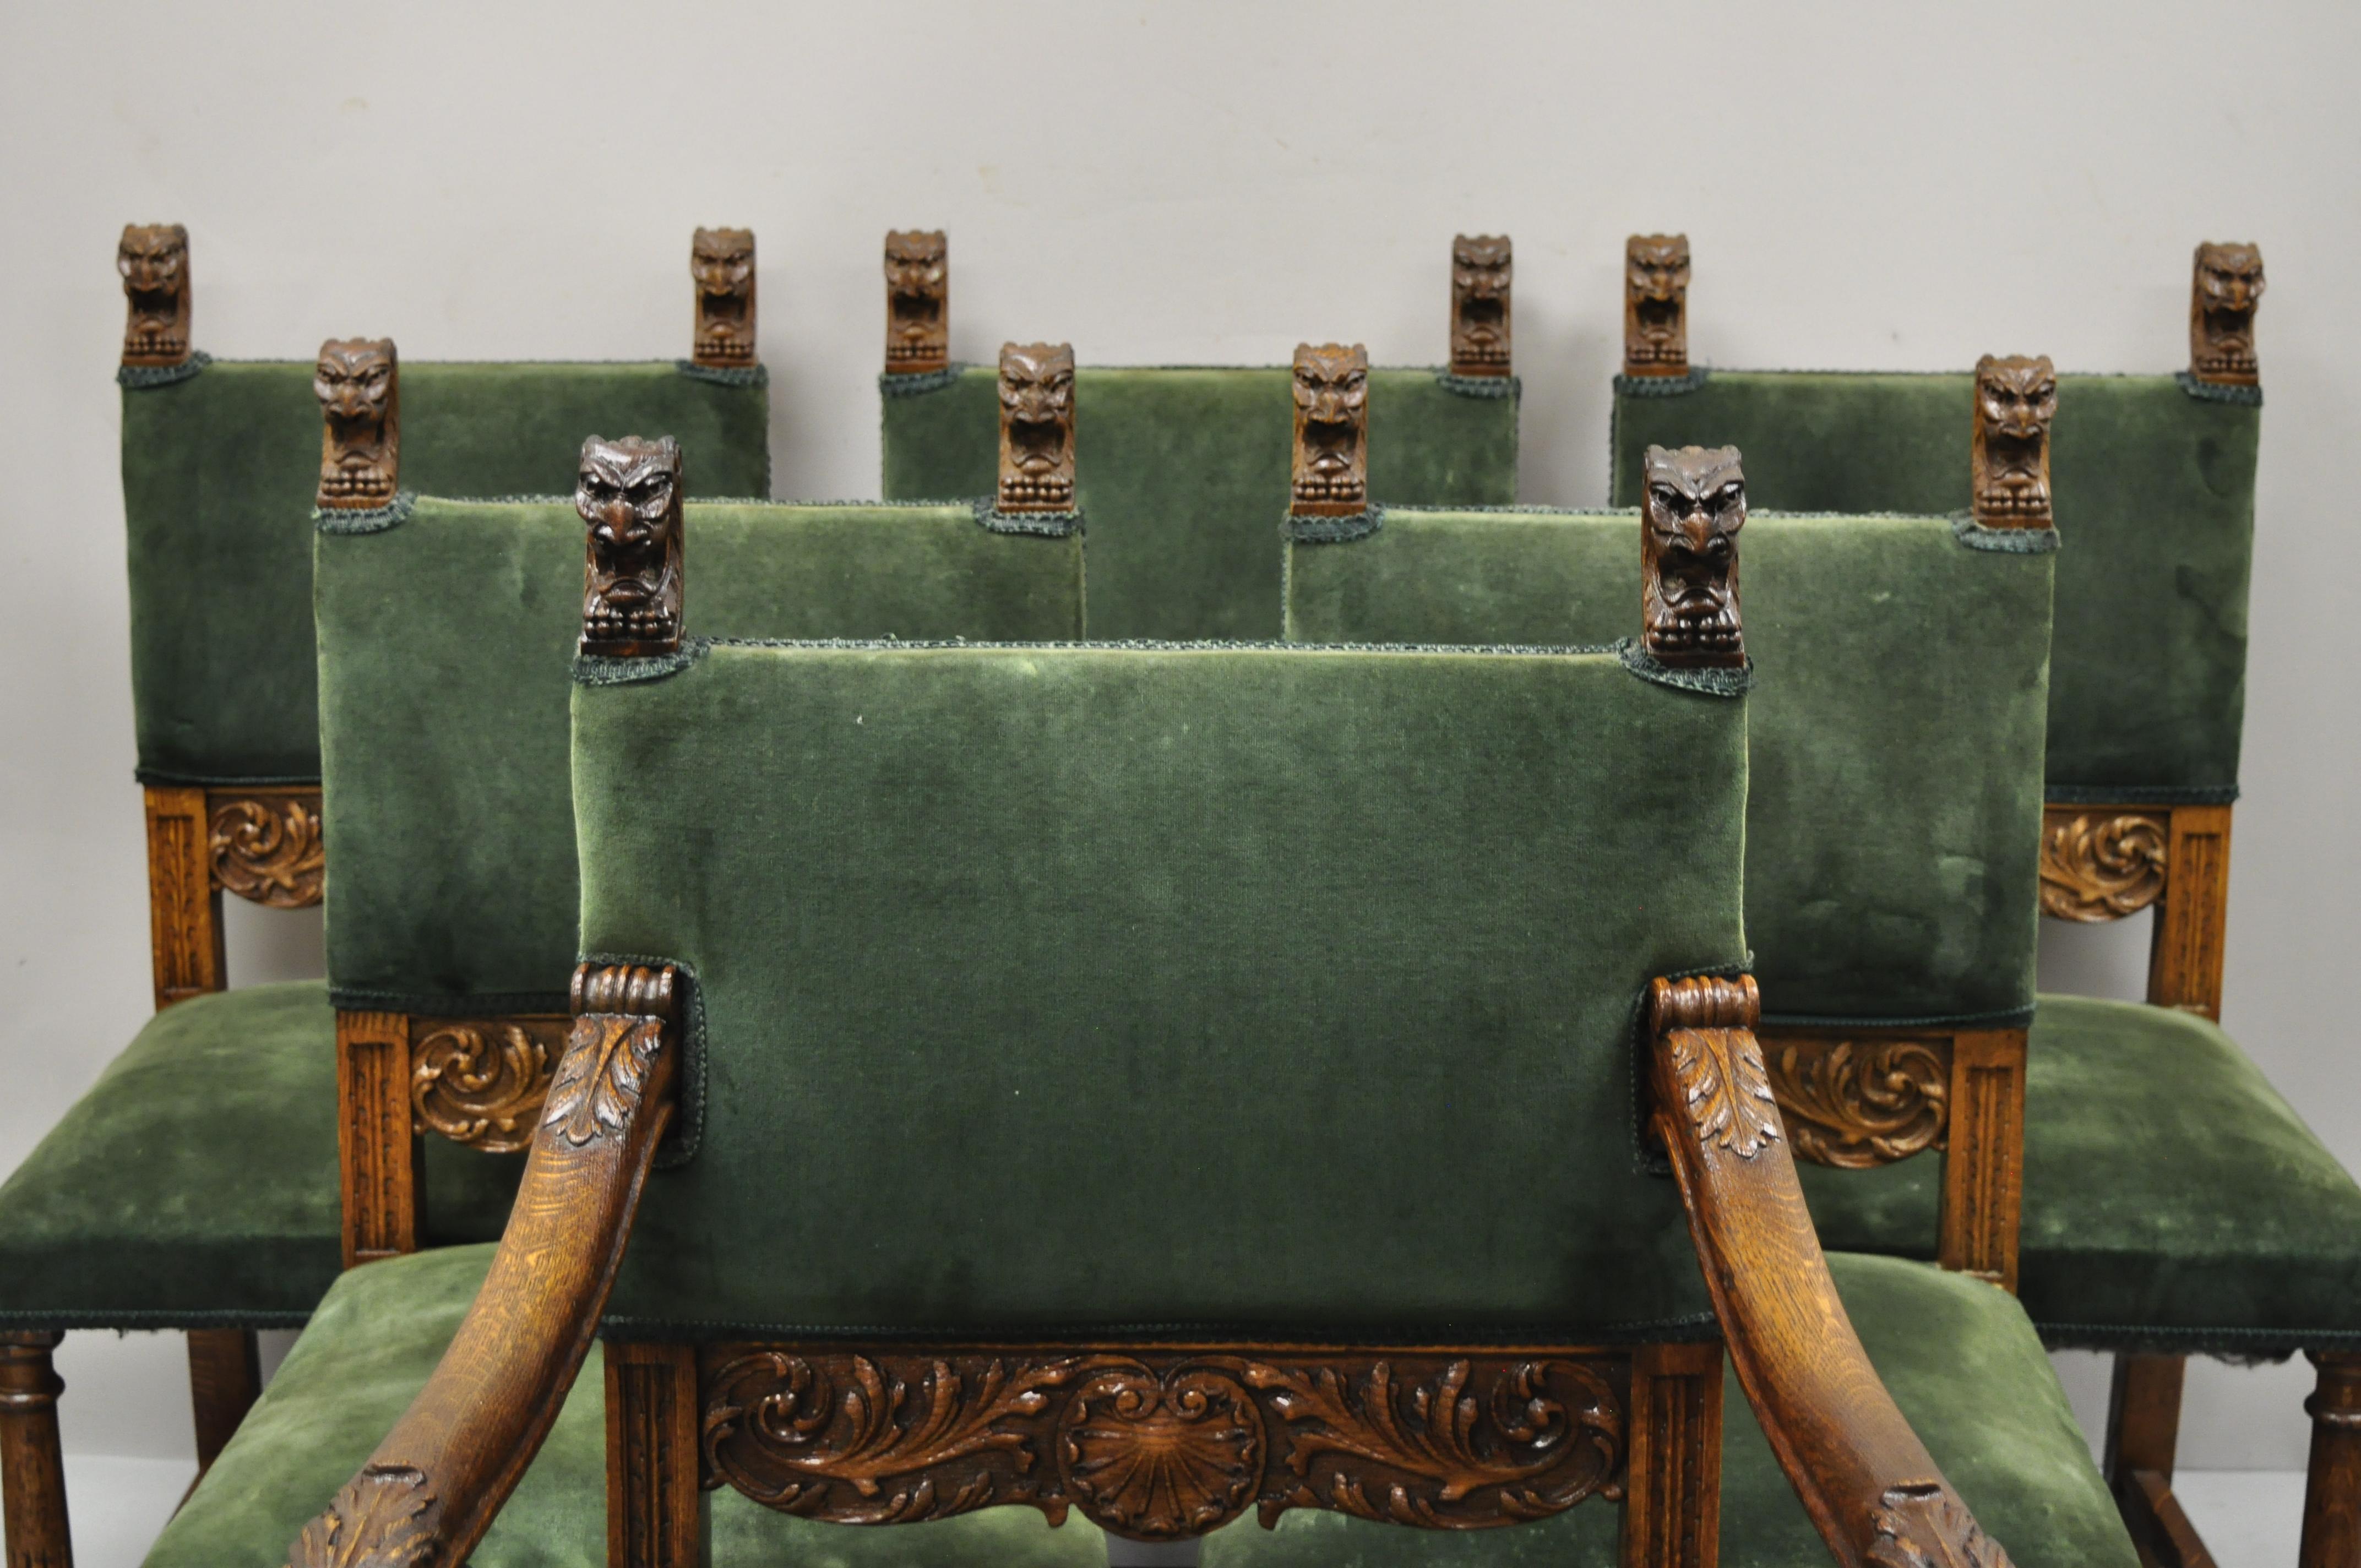 Antique Italian Renaissance lion carved oak wood green mohair dining chairs - set of 6. Set includes (5) side chairs, (1) armchair, green mohair upholstery, lion head carved finials, solid oak wood construction, beautiful wood grain, very nice